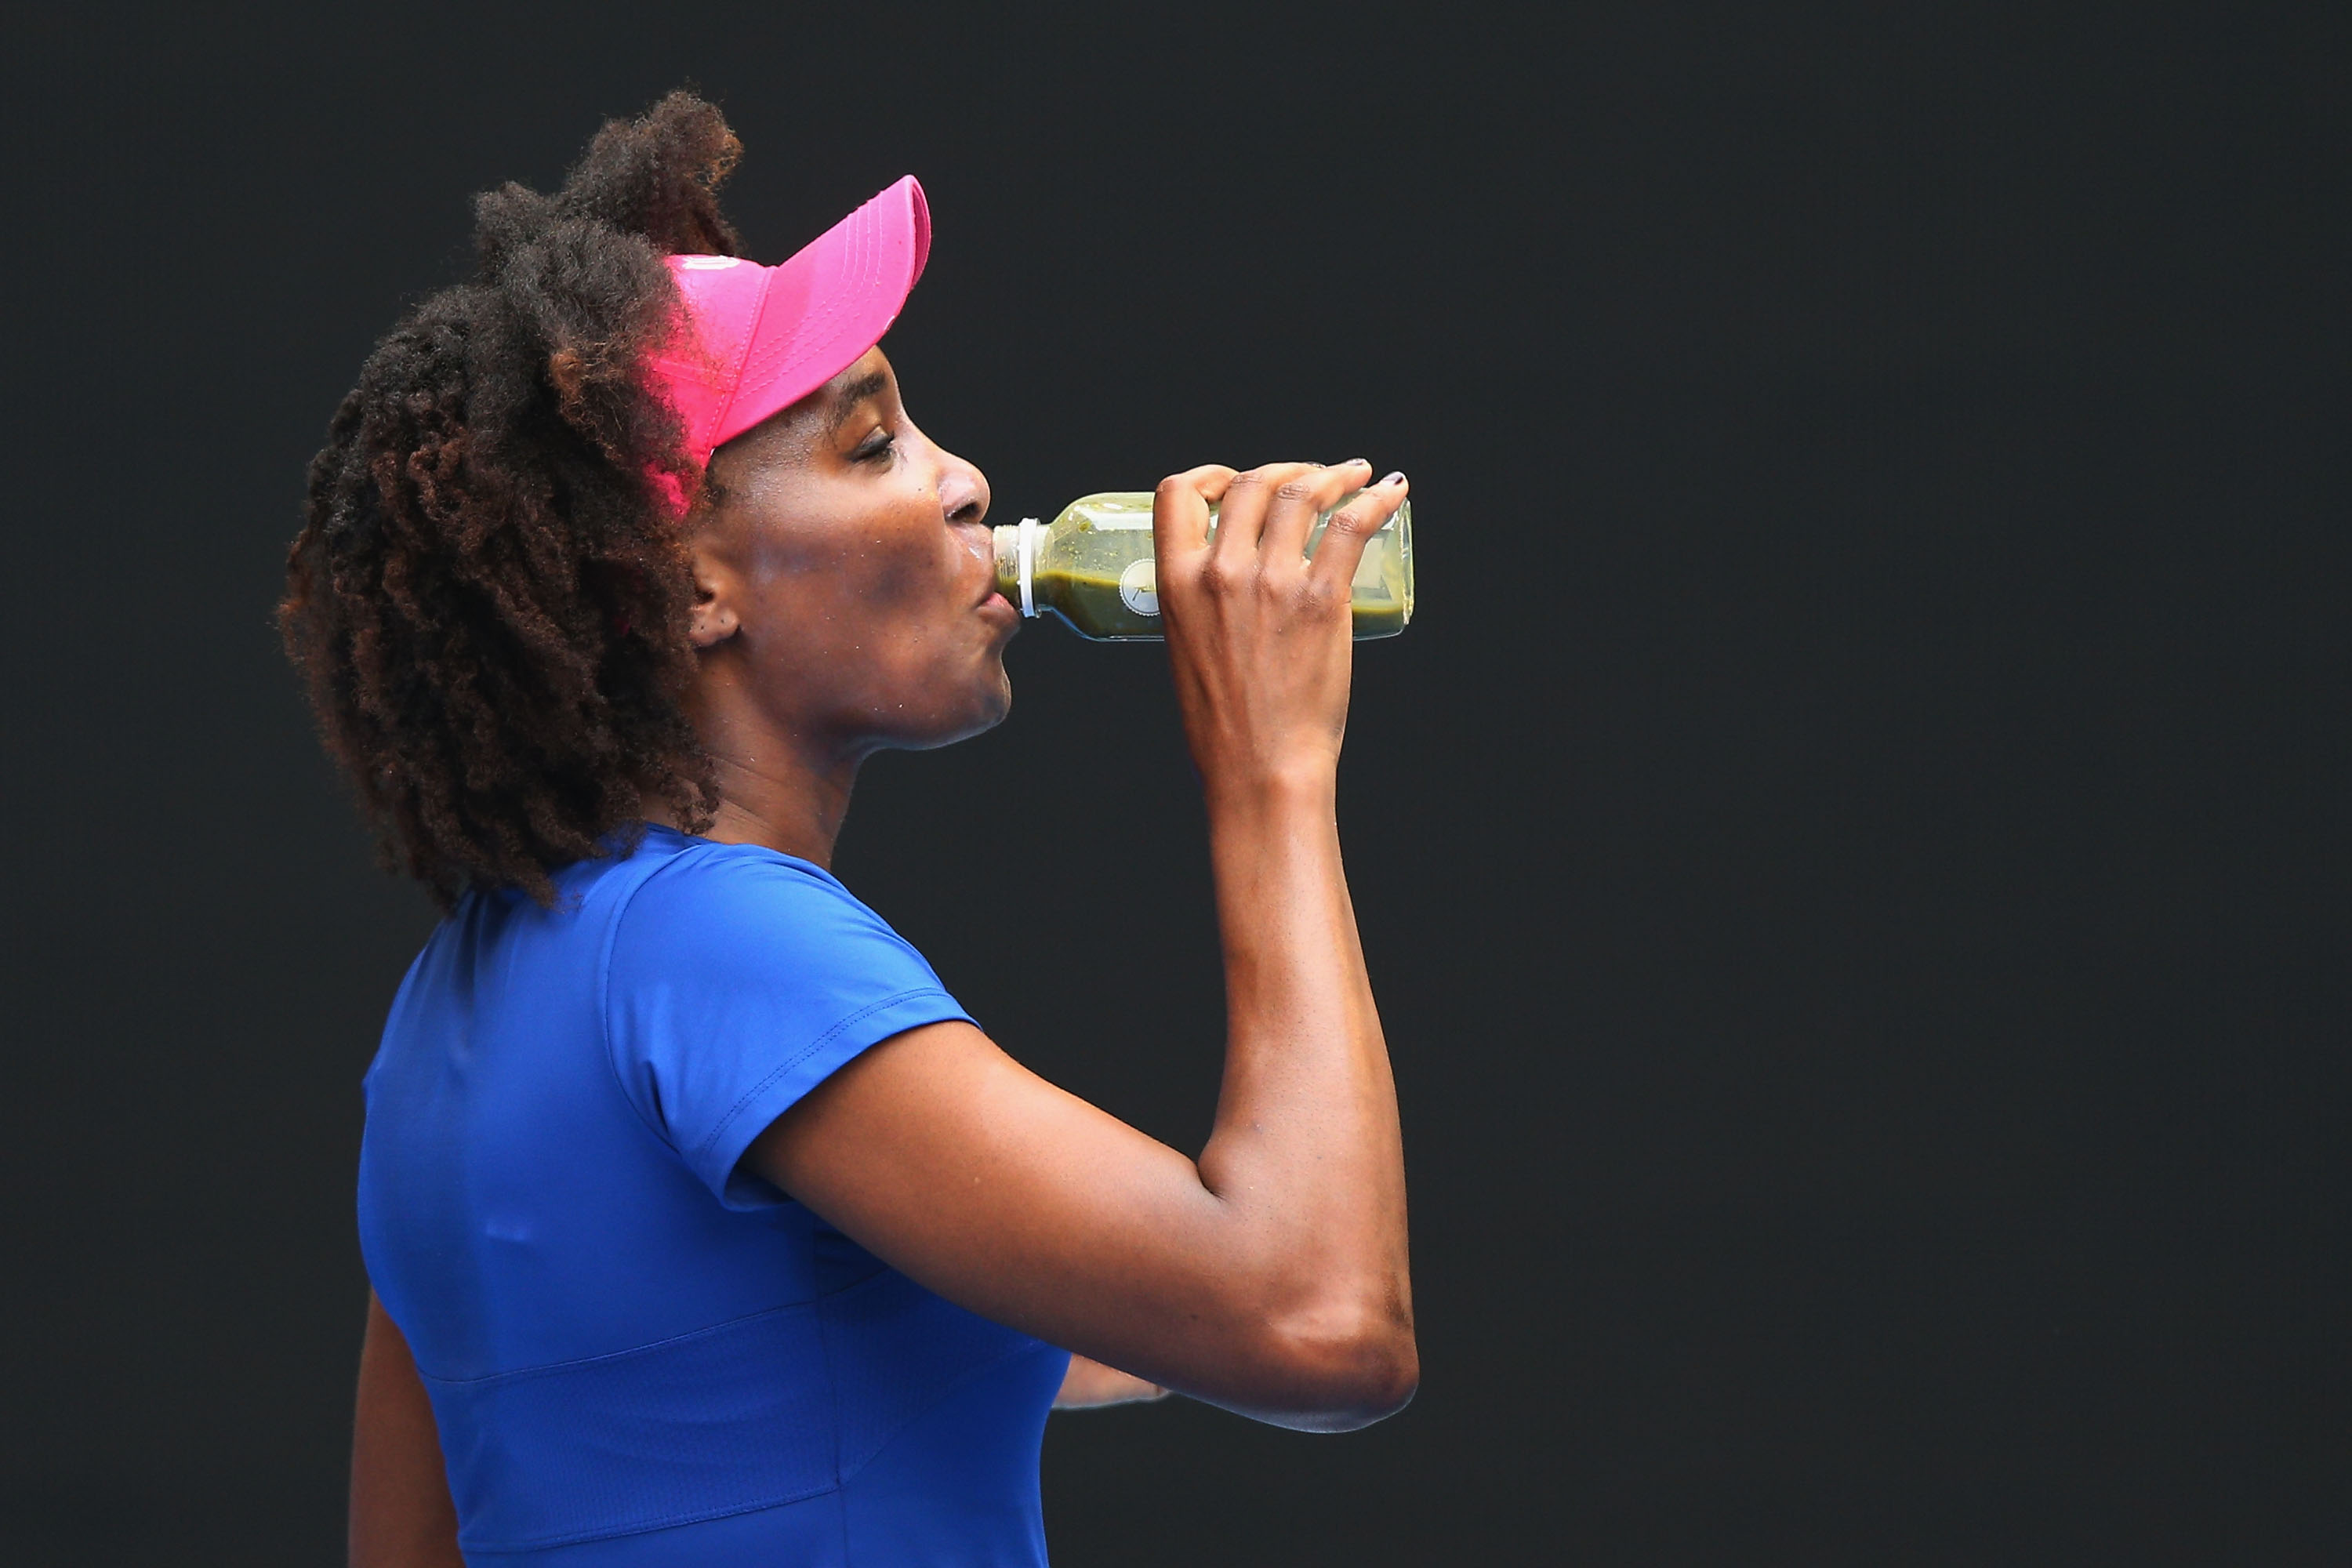 MELBOURNE, AUSTRALIA - JANUARY 10:  Venus Williams of the USA takes a drink during a practice session ahead of the 2017 Australian Open at Melbourne Park on January 10, 2017 in Melbourne, Australia.  (Photo by Michael Dodge/Getty Images) (Michael Dodge—Getty Images)